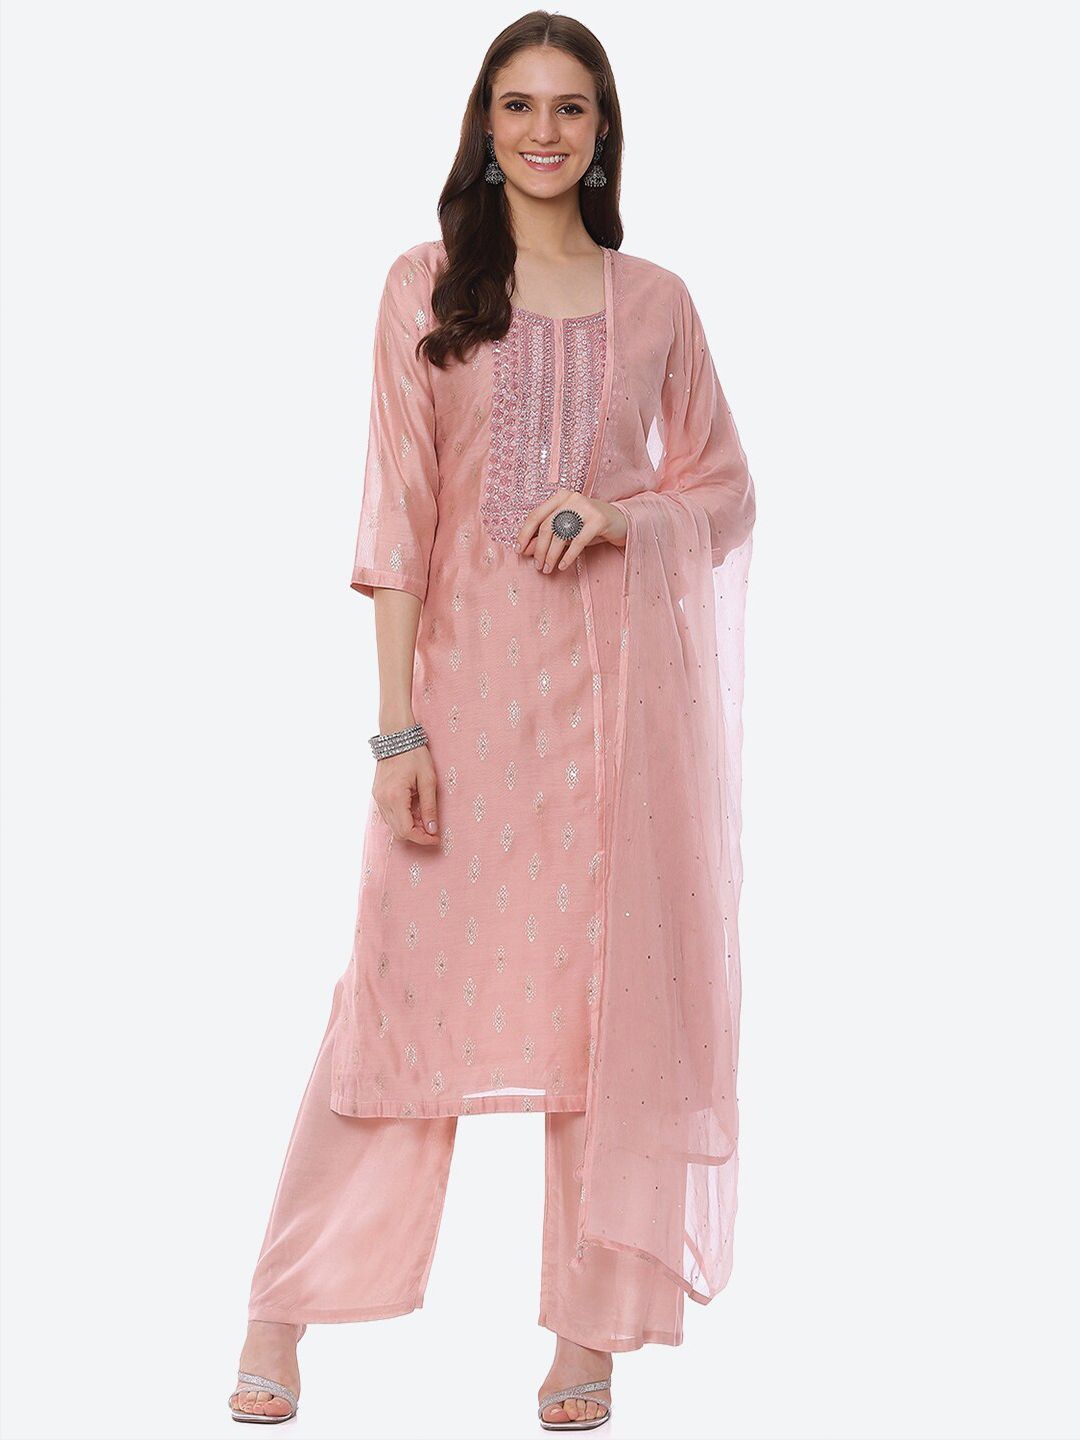 Biba Peach-Coloured & Silver-Toned Embroidered Unstitched Dress Material Price in India